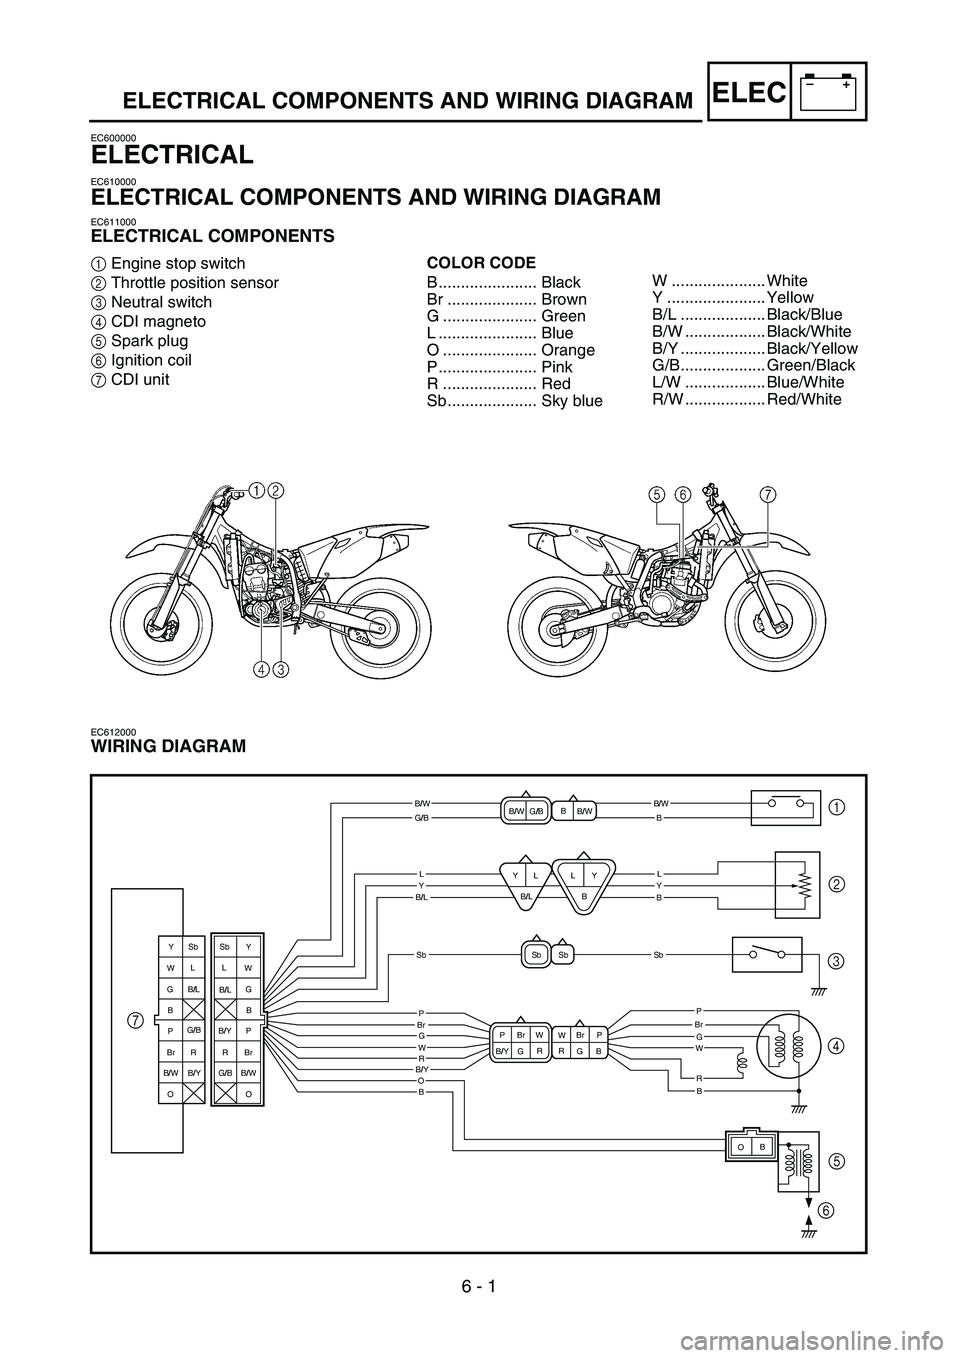 YAMAHA YZ250F 2003  Notices Demploi (in French)  
6 - 1
–+ELEC
 
ELECTRICAL COMPONENTS AND WIRING DIAGRAM 
EC600000 
ELECTRICAL 
EC610000 
ELECTRICAL COMPONENTS AND WIRING DIAGRAM 
EC611000 
ELECTRICAL COMPONENTS 
1  
Engine stop switch  
2  
Thr